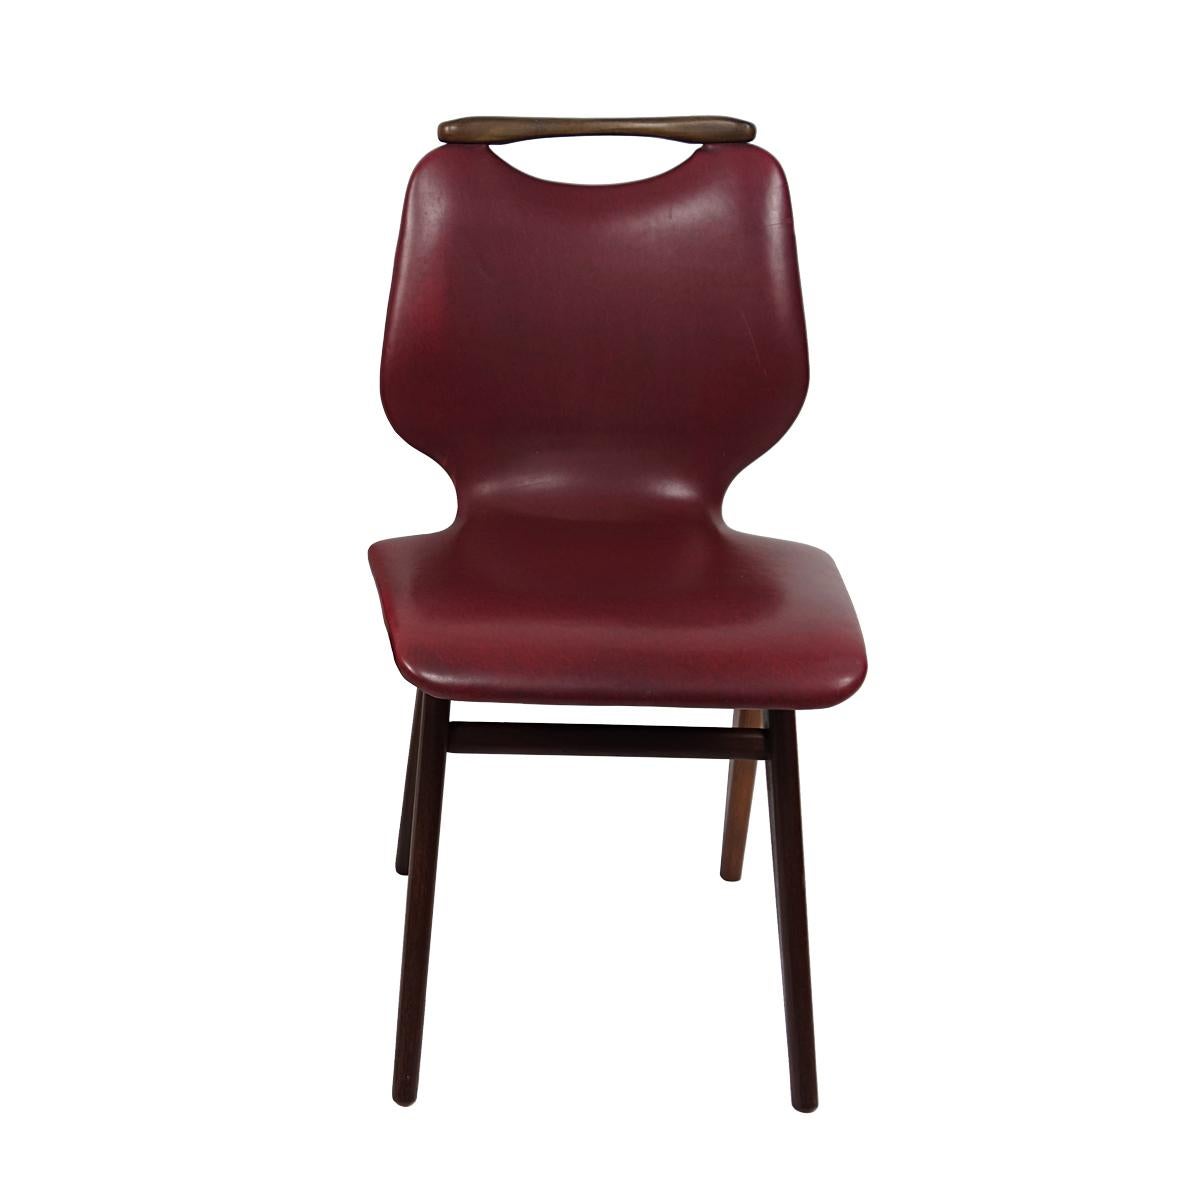 Faux Leather Mid-Century Modern Set of 4 Dutch Design Dining Chairs by Louis van Teeffelen